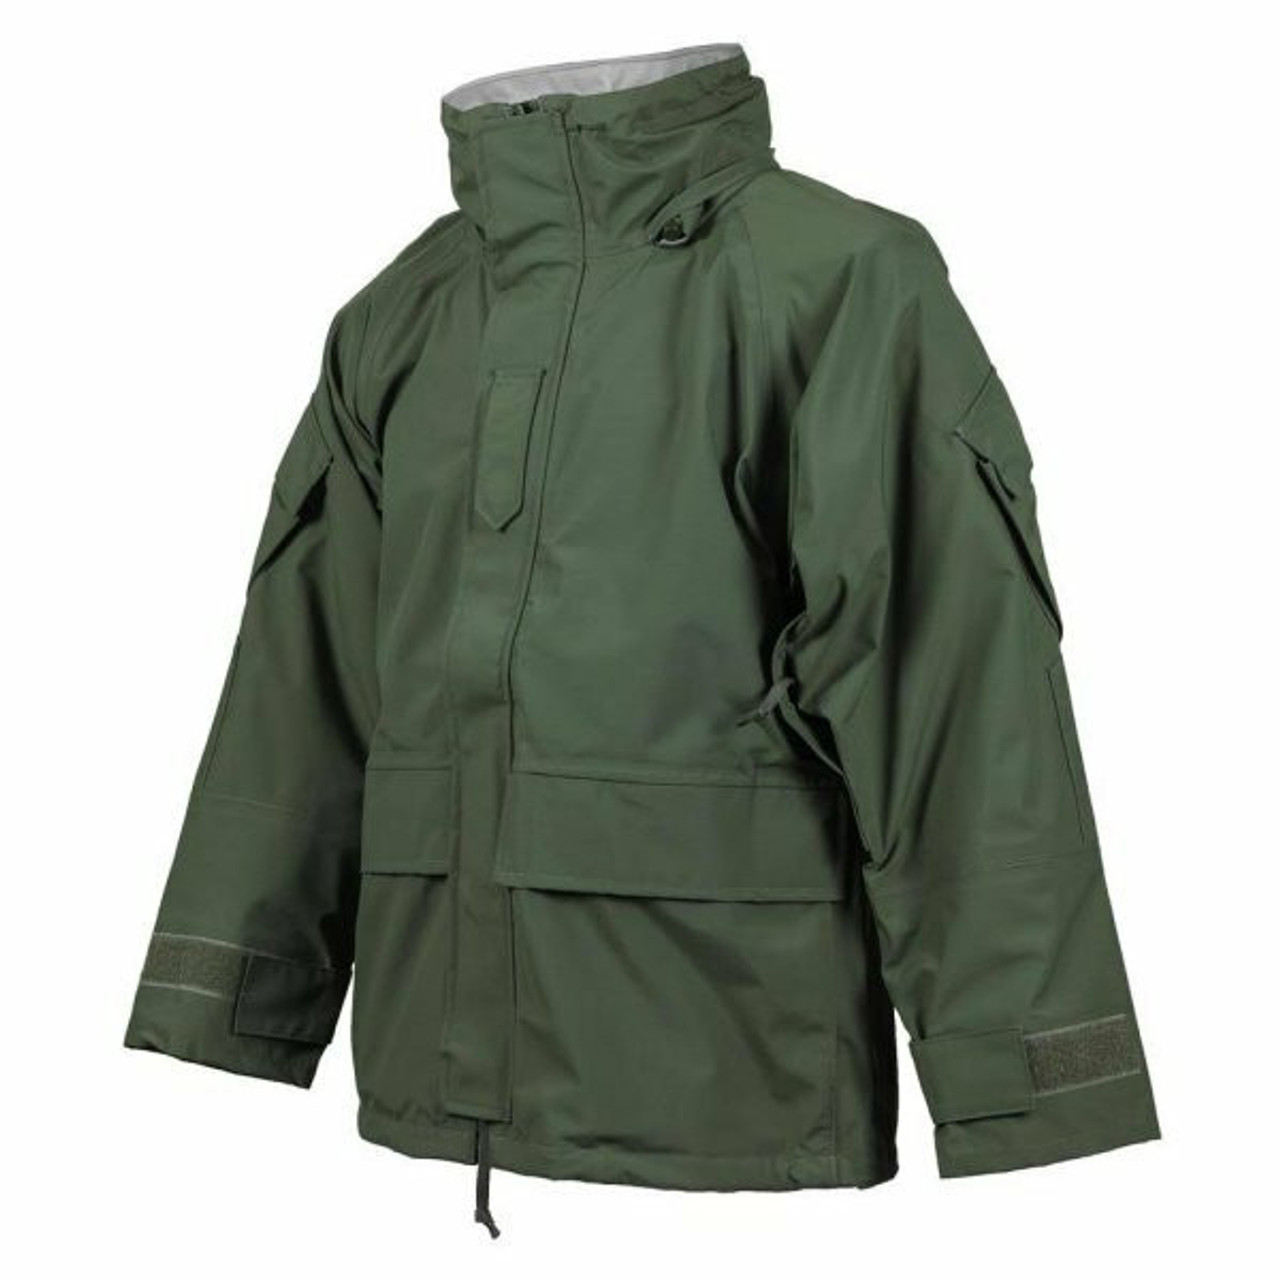 ECWCS Waterproof Windproof Jacket With Removable Fleece A-TACS LE Night Camo 